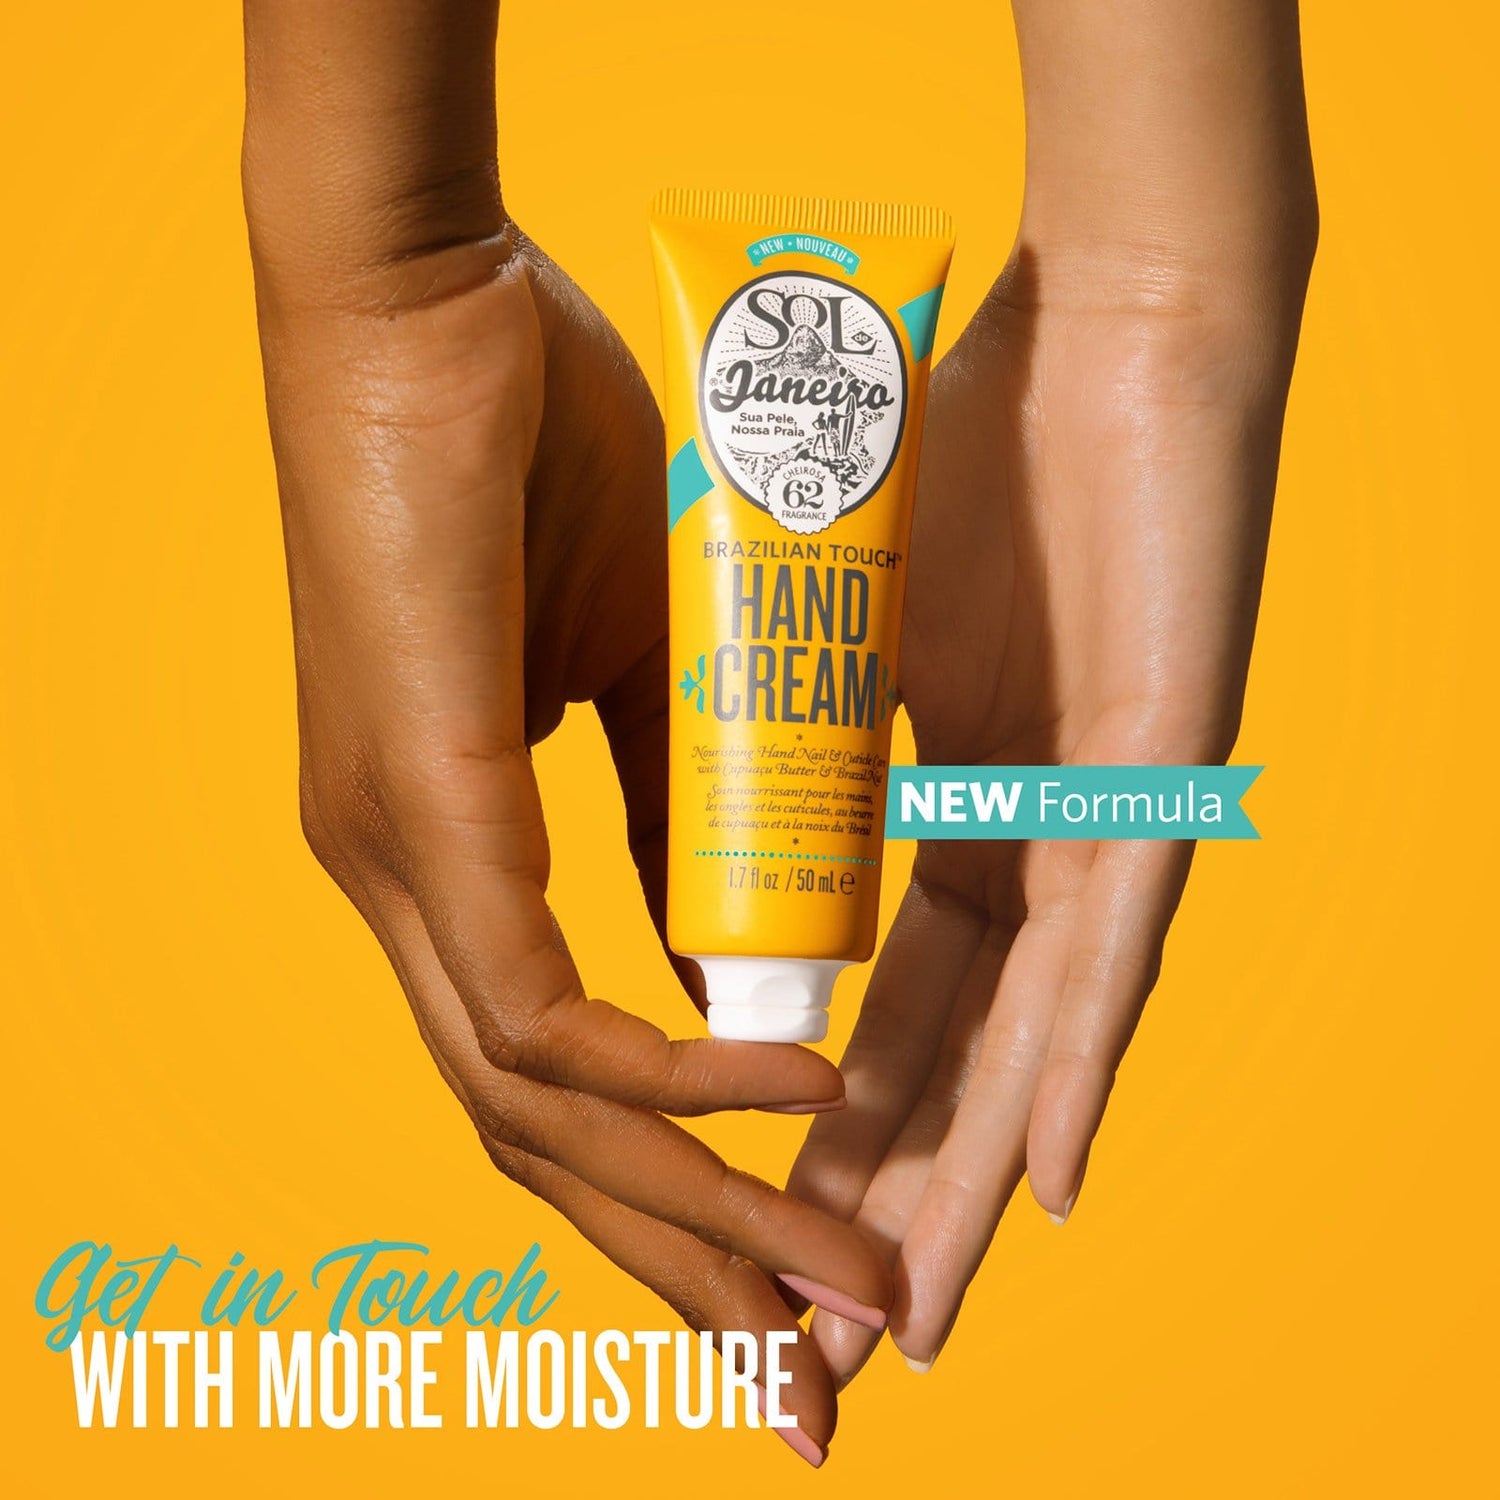 hands holding  Brazilian Touch Hand Cream, Sol de Janeiro. New Formula. Get in Touch with more Moisture